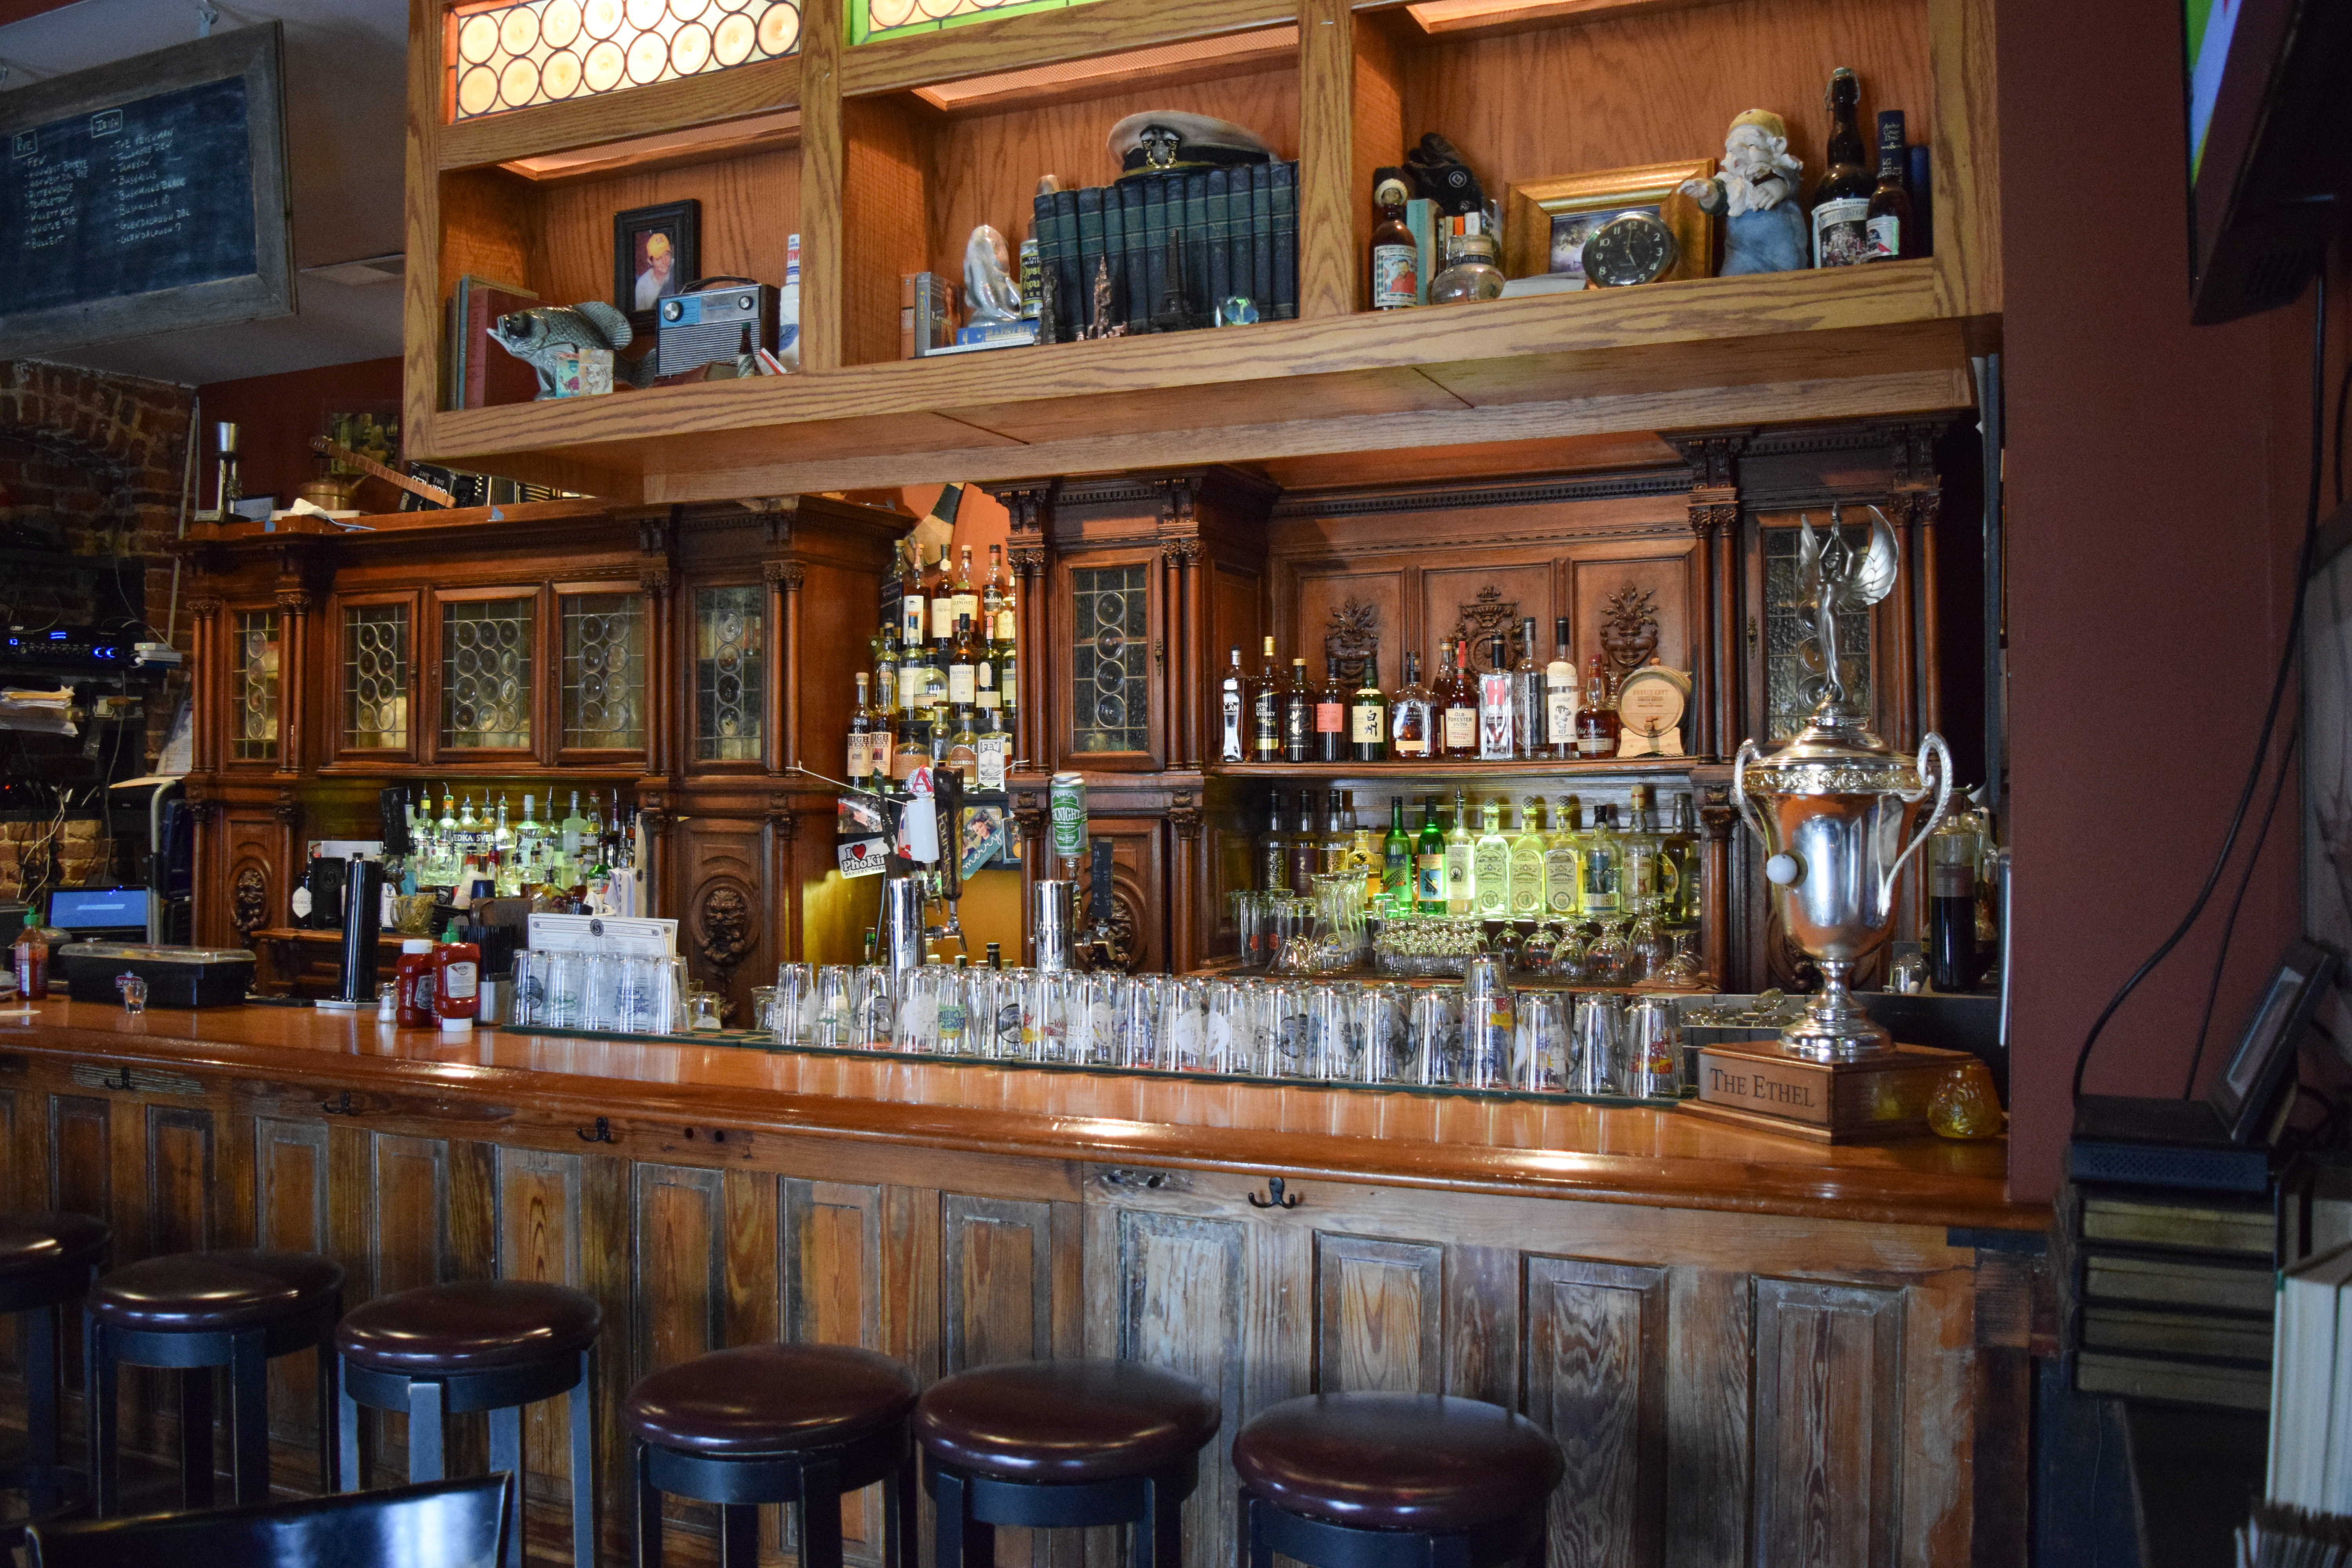 The bar at Steinbeck's.